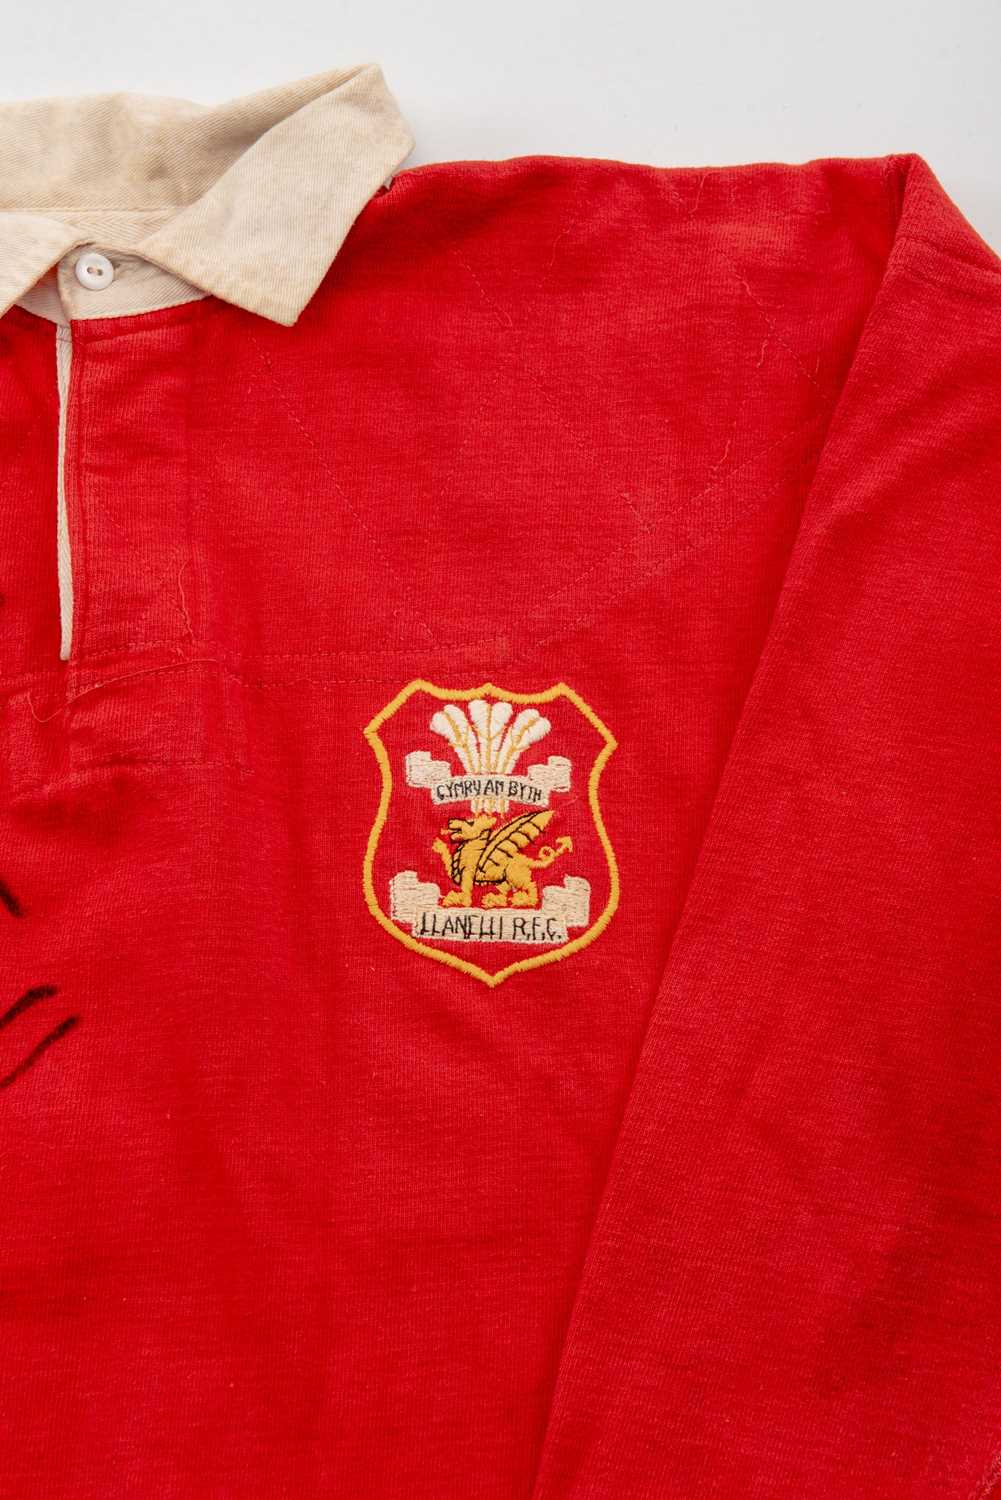 PHIL BENNETT | LLANELLI RFC 1974/75 Llanelli Rugby Union red jersey with white collar believed to be